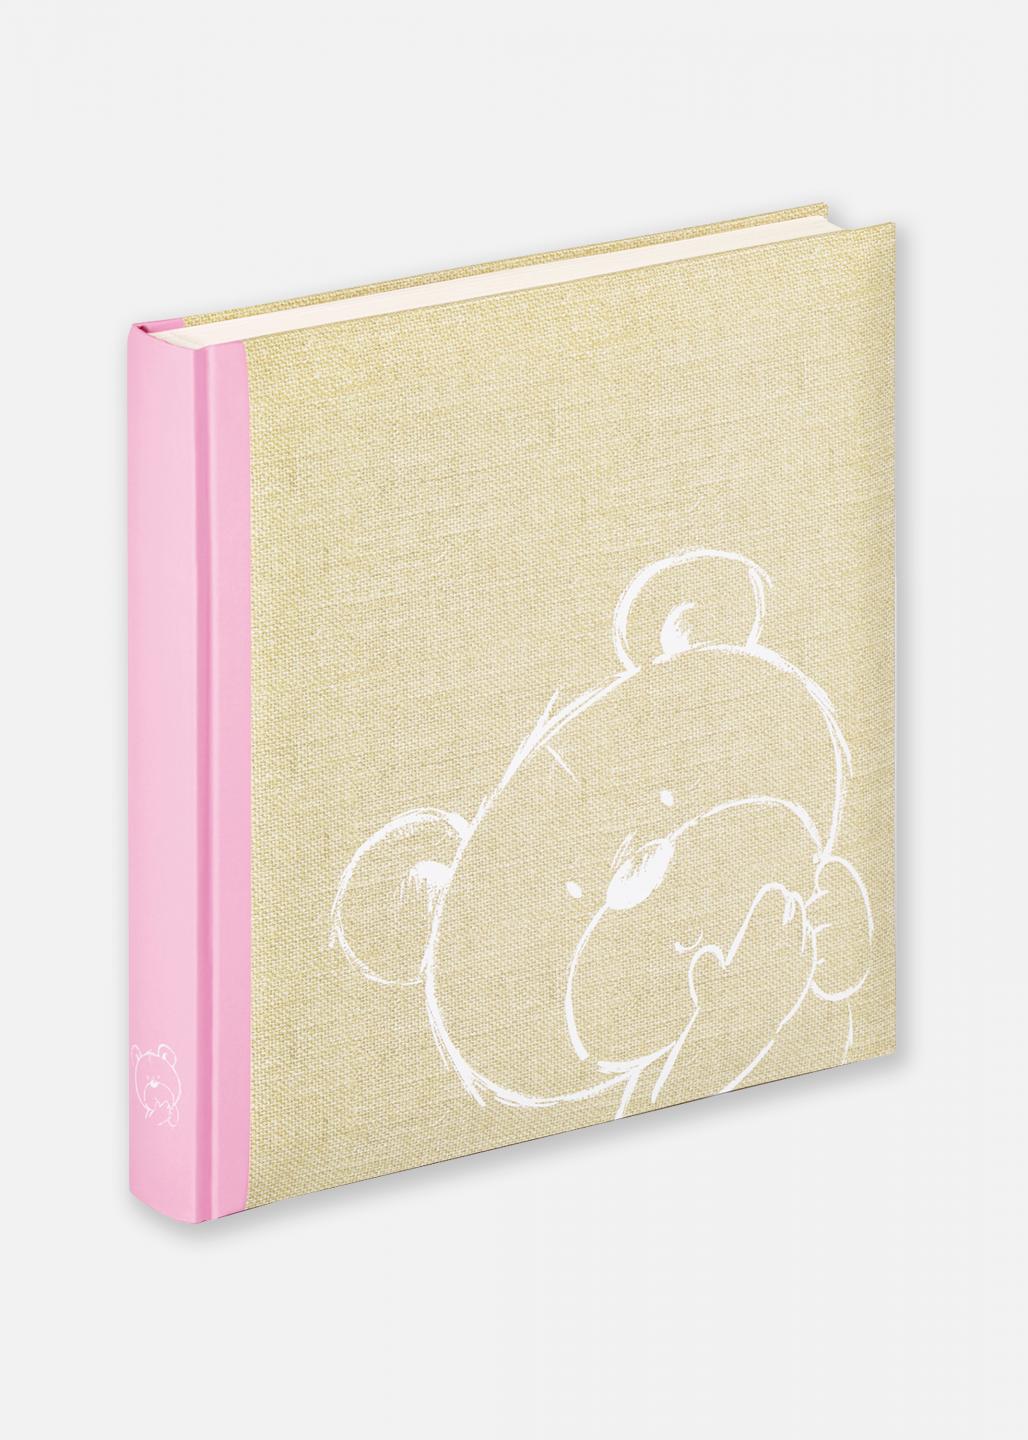 Buy Coccole Album Pink - 200 Pictures in 11x15 cm here 